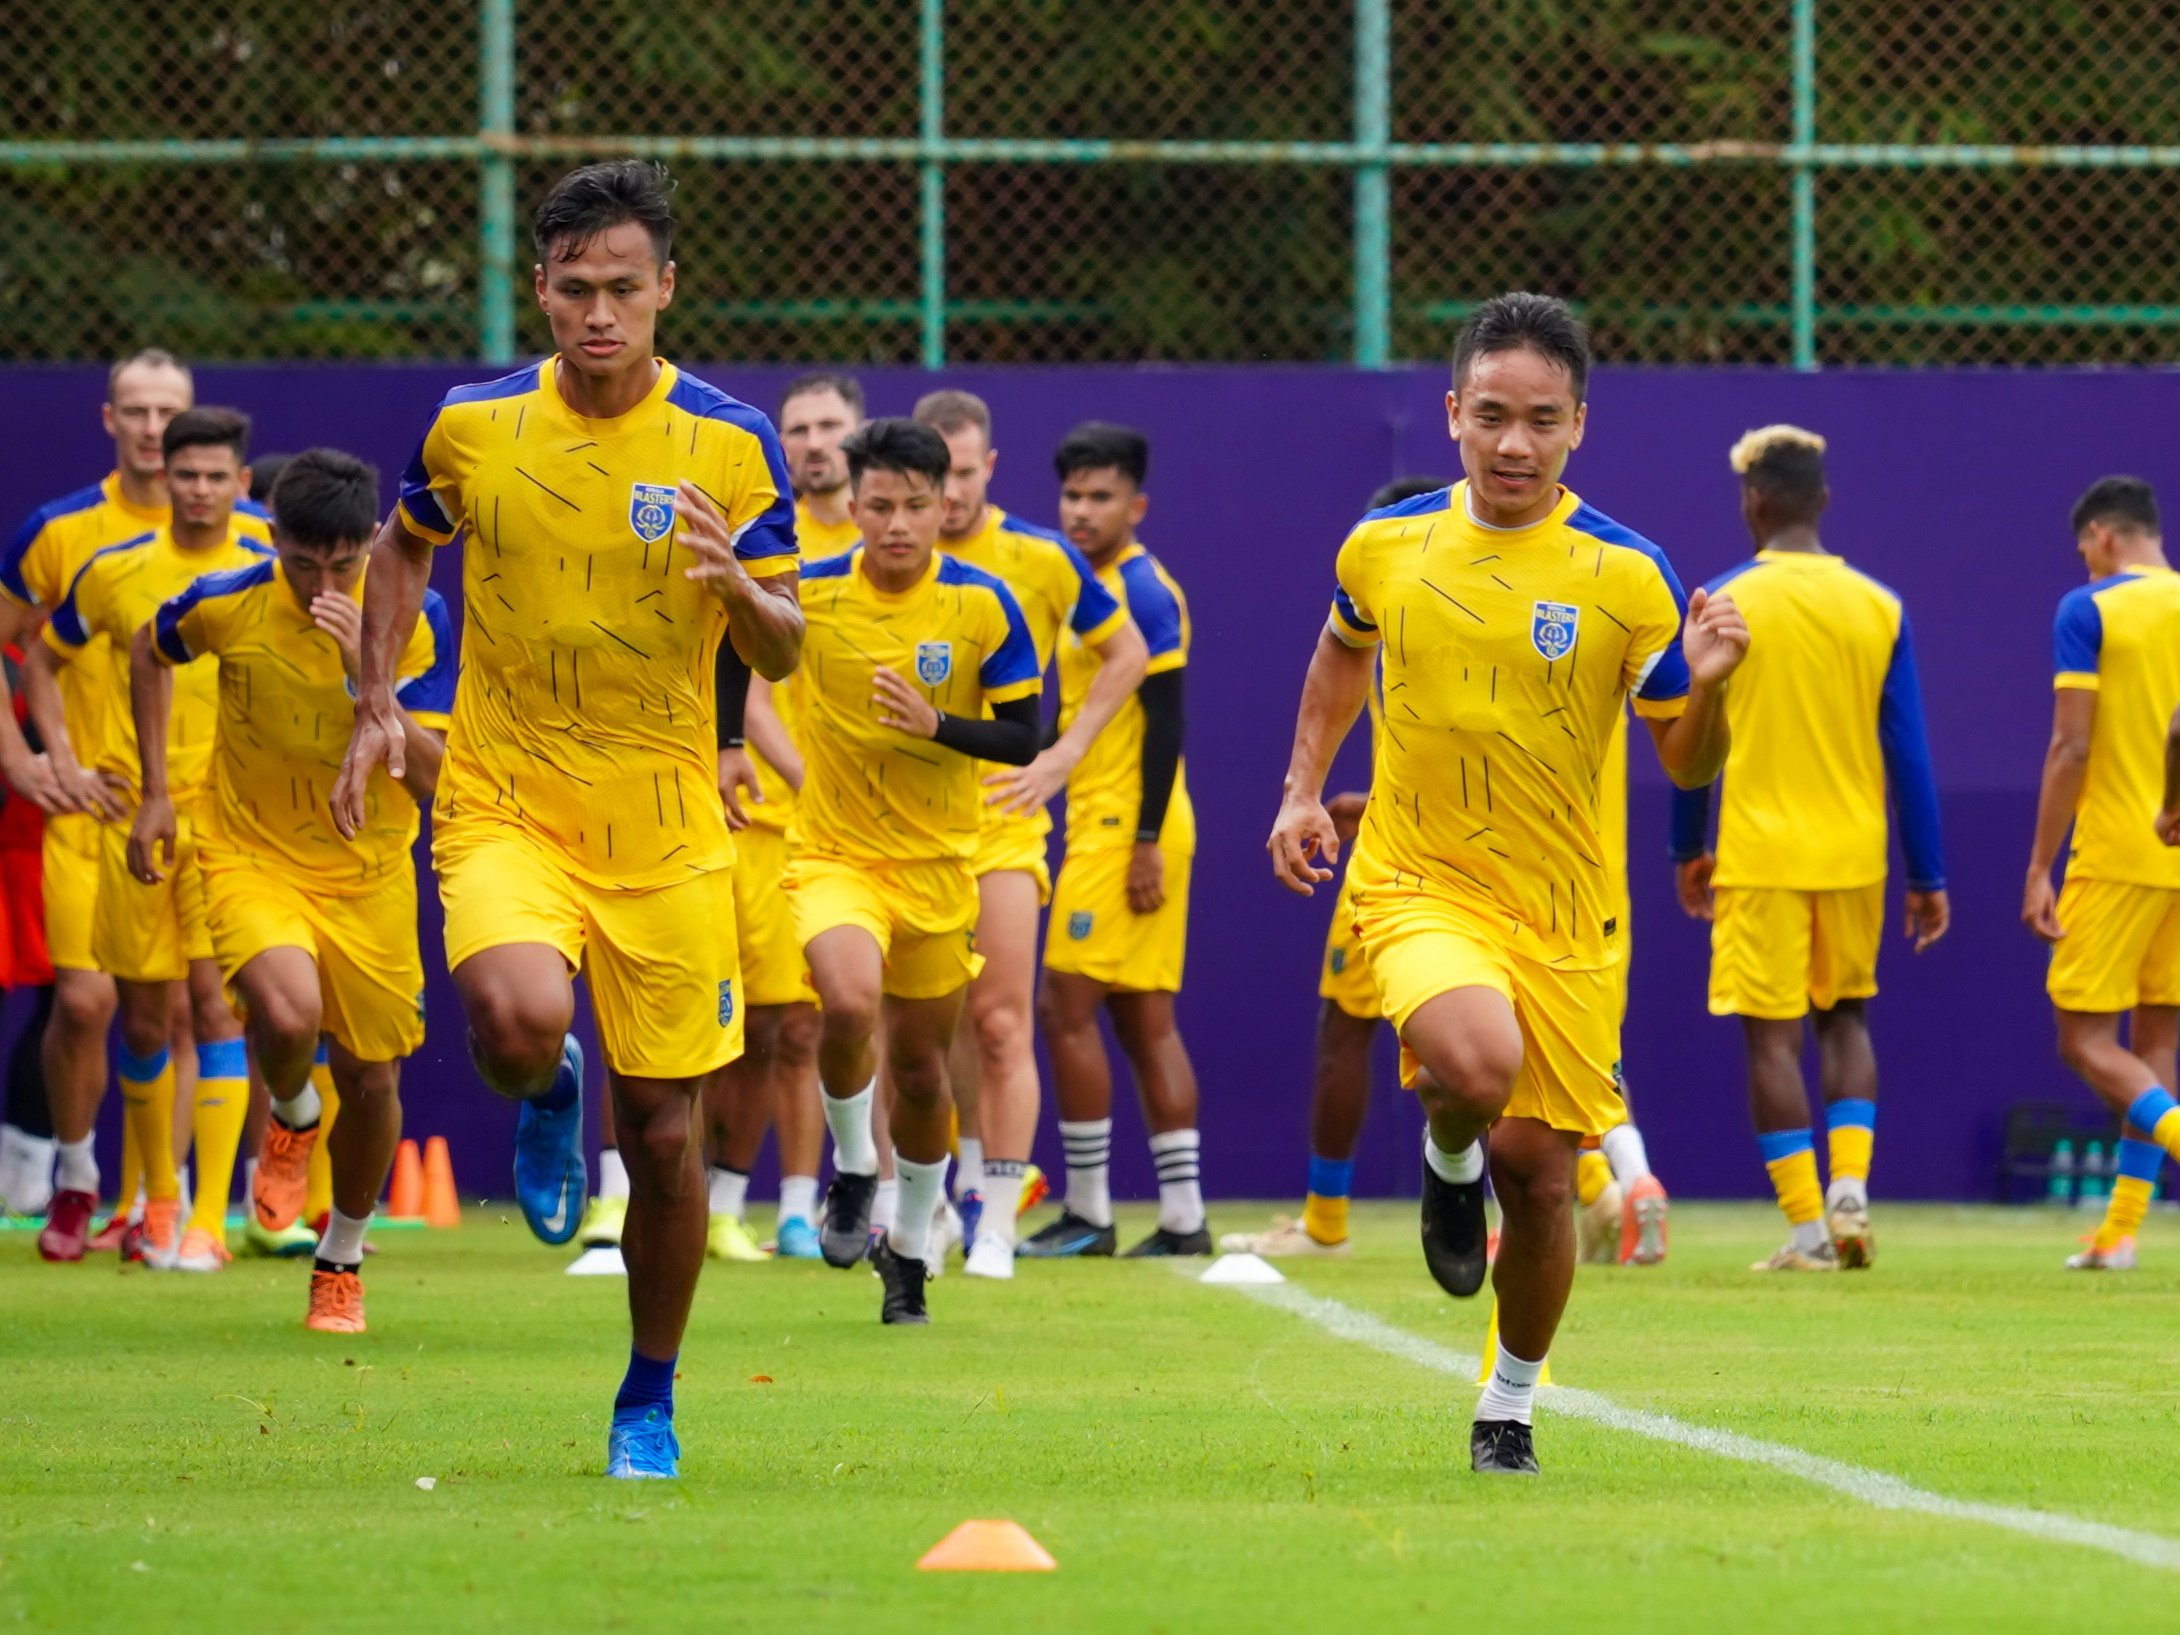 KBFC vs EBFC LIVE STREAMING: Kerala Blasters FC and East Bengal FC face off to open ISL 2022-23 LIVE Streaming, Kerala Blasters vs East Bengal LIVE 